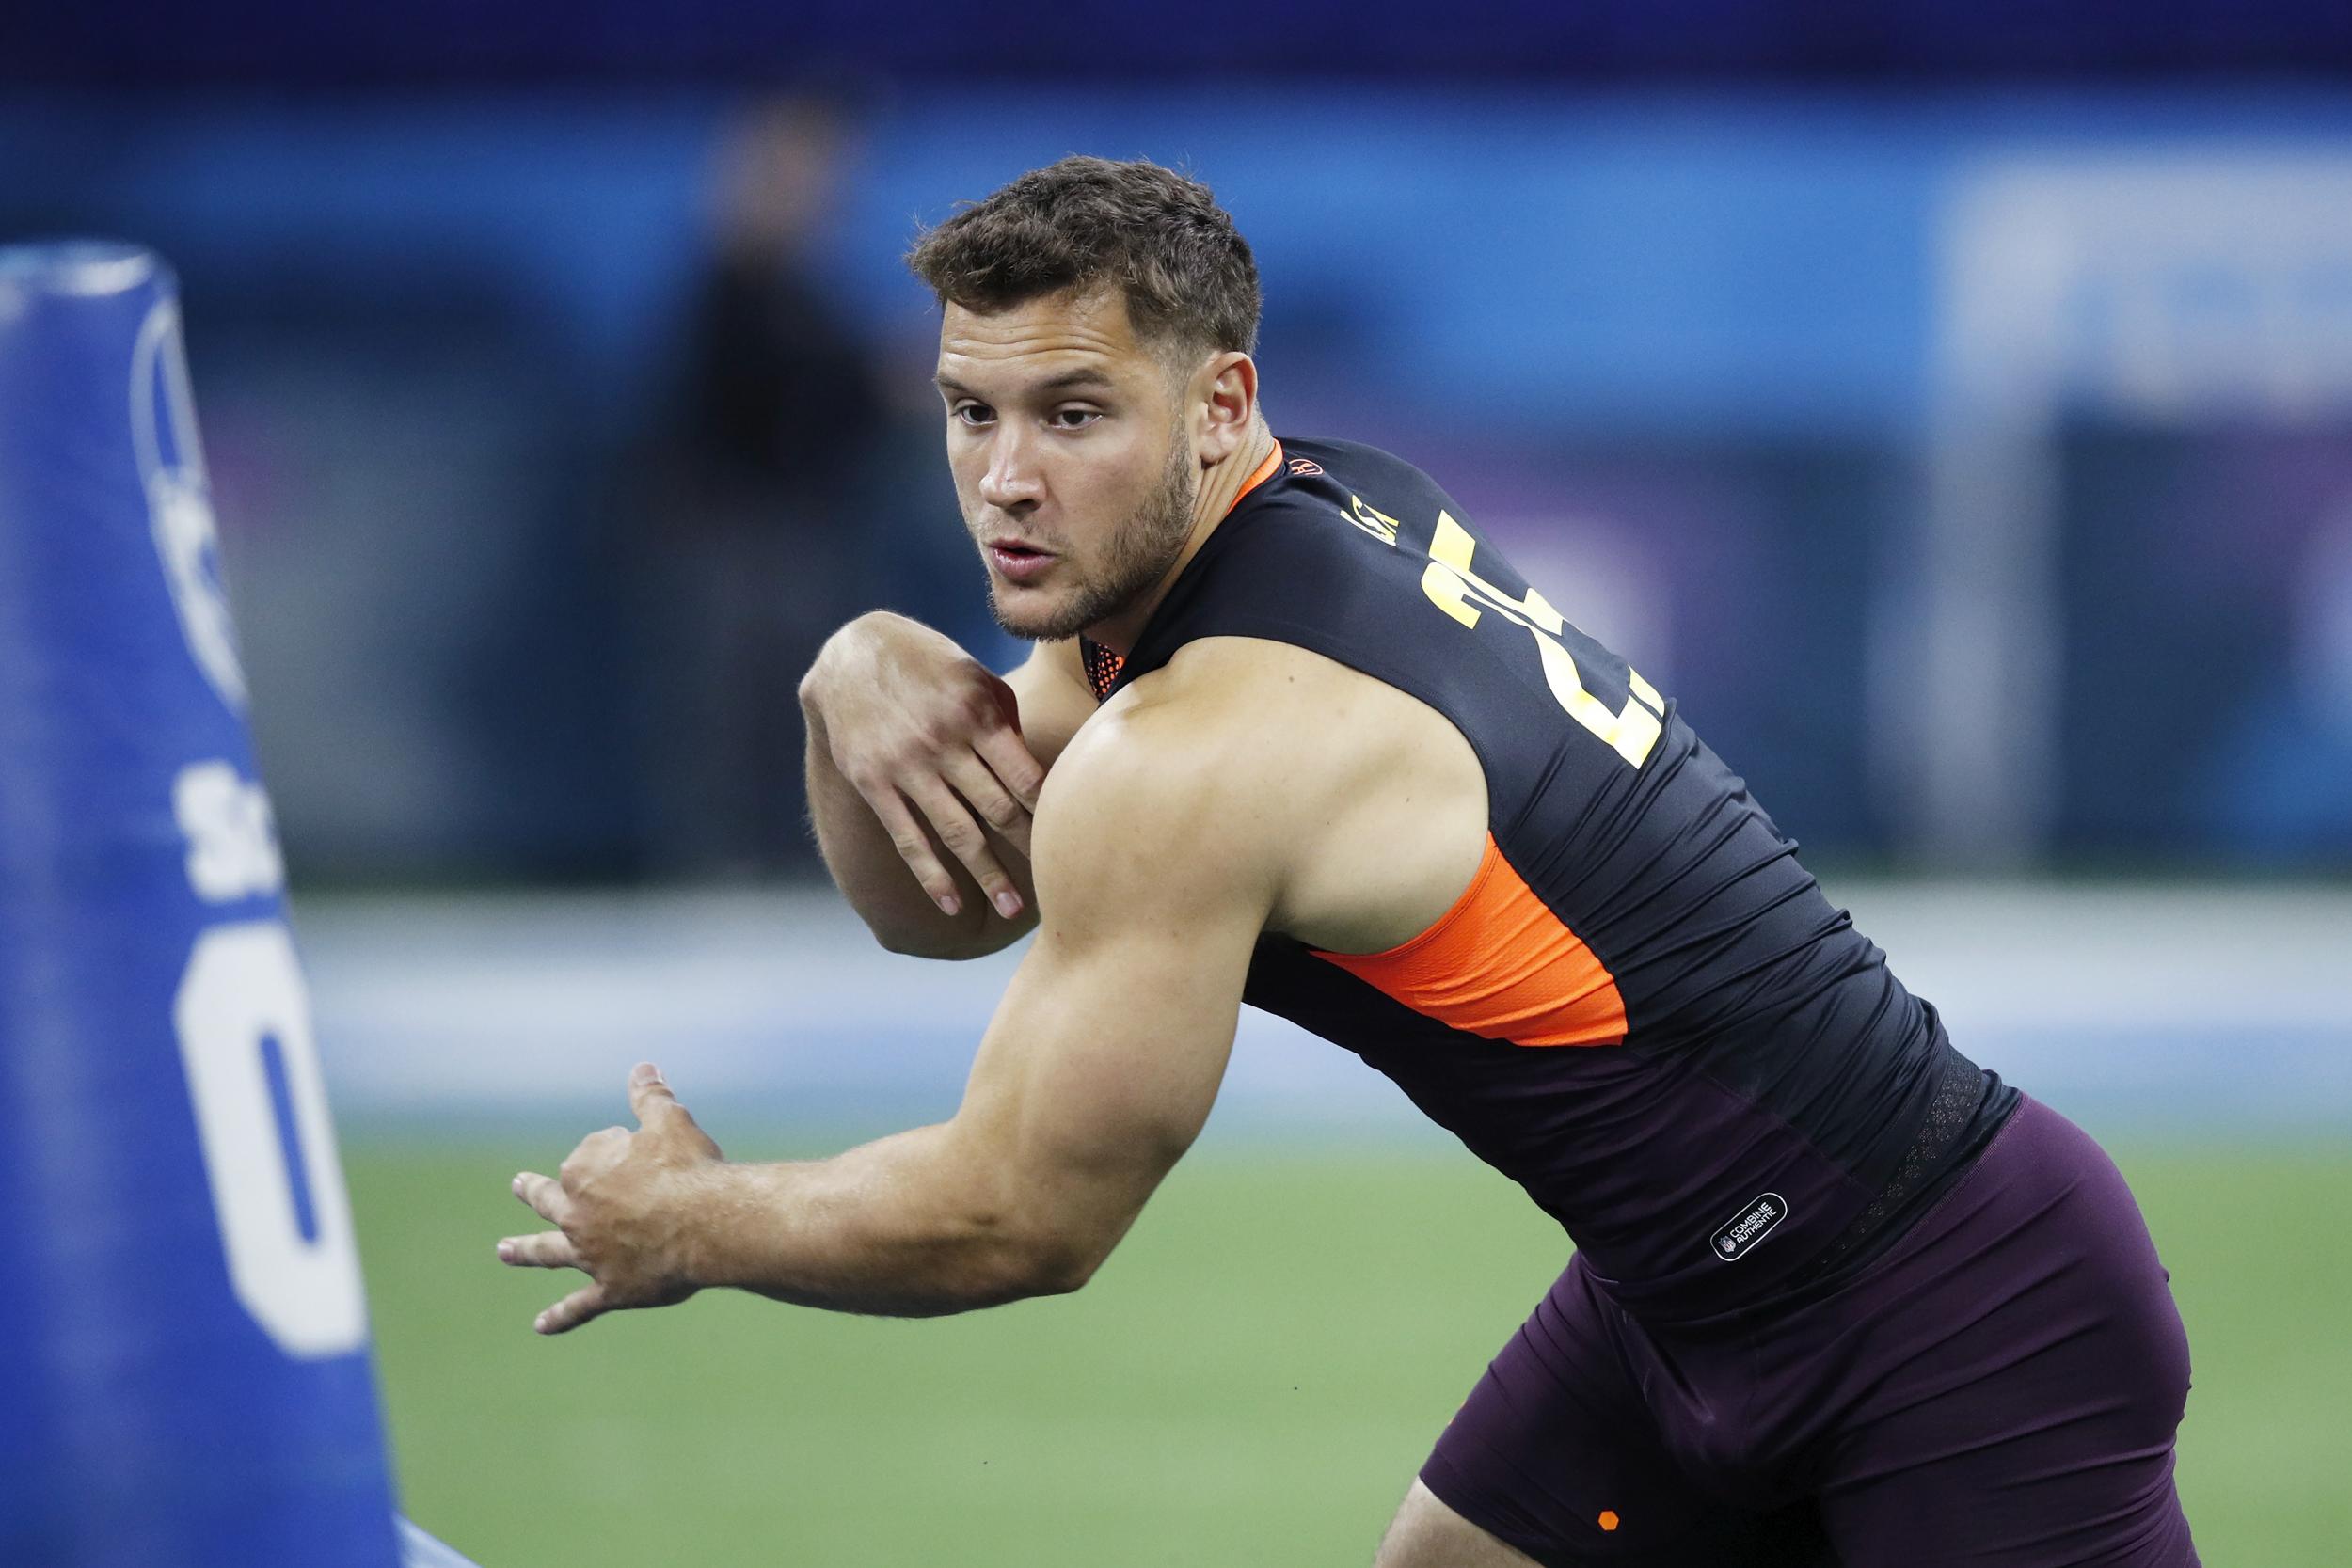 Nick Bosa missed his senior season at Ohio State but shone at the Combine